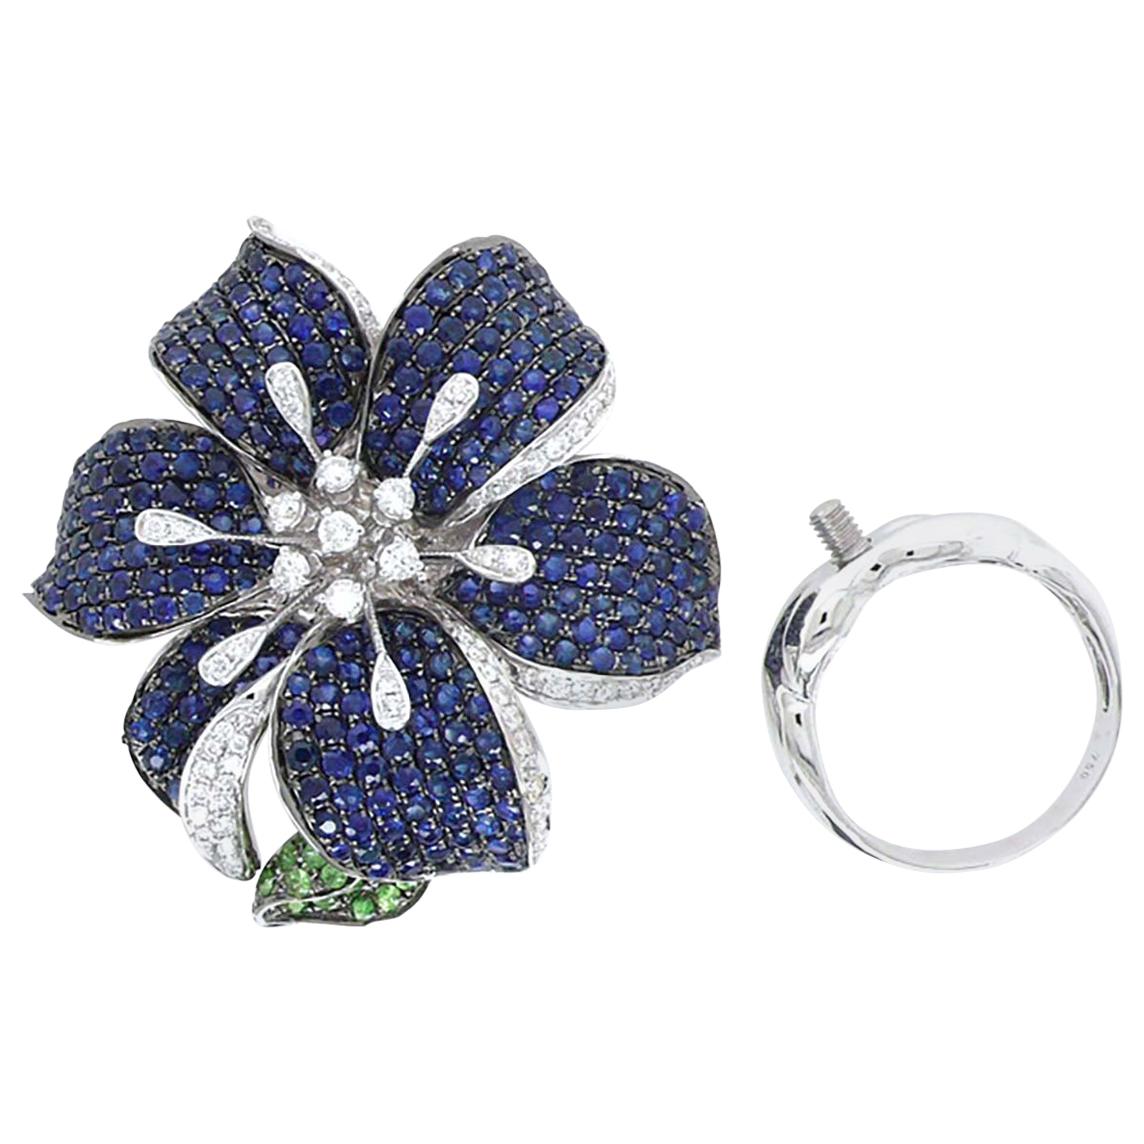 3 in 1 Blue Sapphire and Green Garnet Cocktail Ring, Brooch, Pendant

VERY FINE AND SPECIAL EXQUISITE PIECE! 

286 ROUND BLUE SAPPHIRES -  6.98 CT
81 ROUND DIAMONDS -  0.85 CT
28 ROUND GREEN GARNET -  0.54 CT
18K WHITE GOLD -  21.69 GM 
